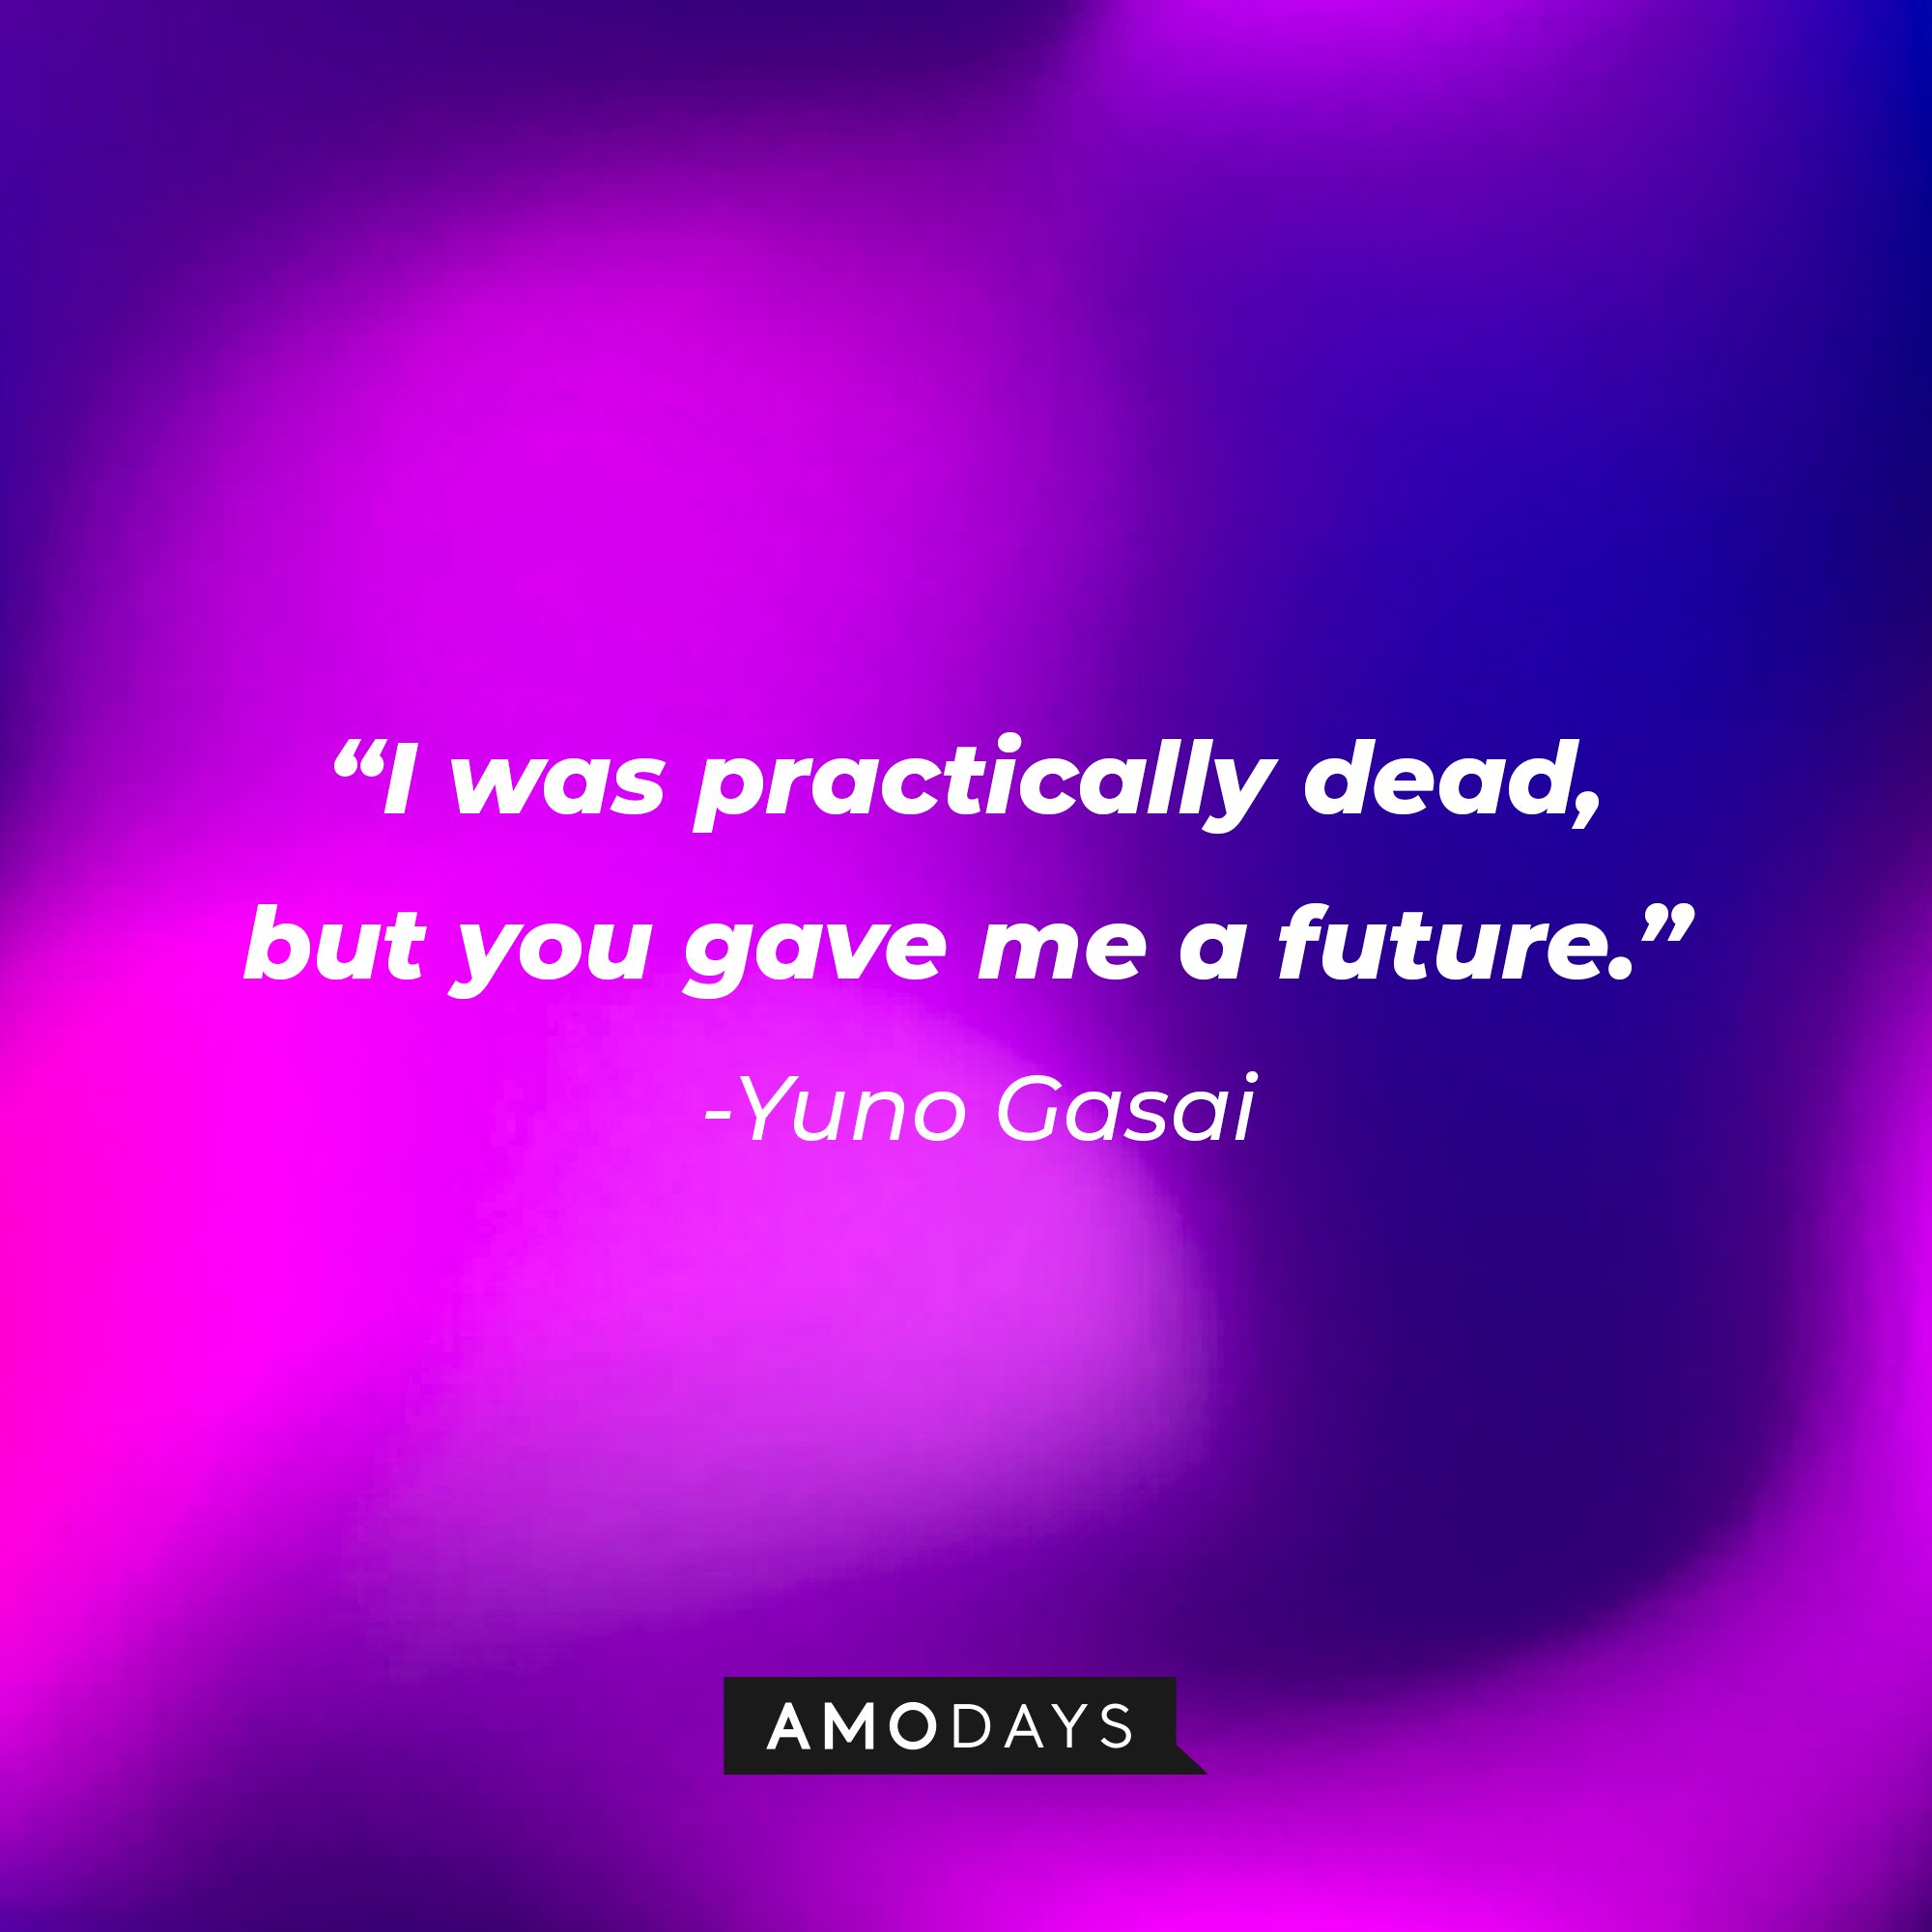 Yuno Gasai ‘s quote: "I was practically dead, but you gave me a future.” | Image: AmoDays 